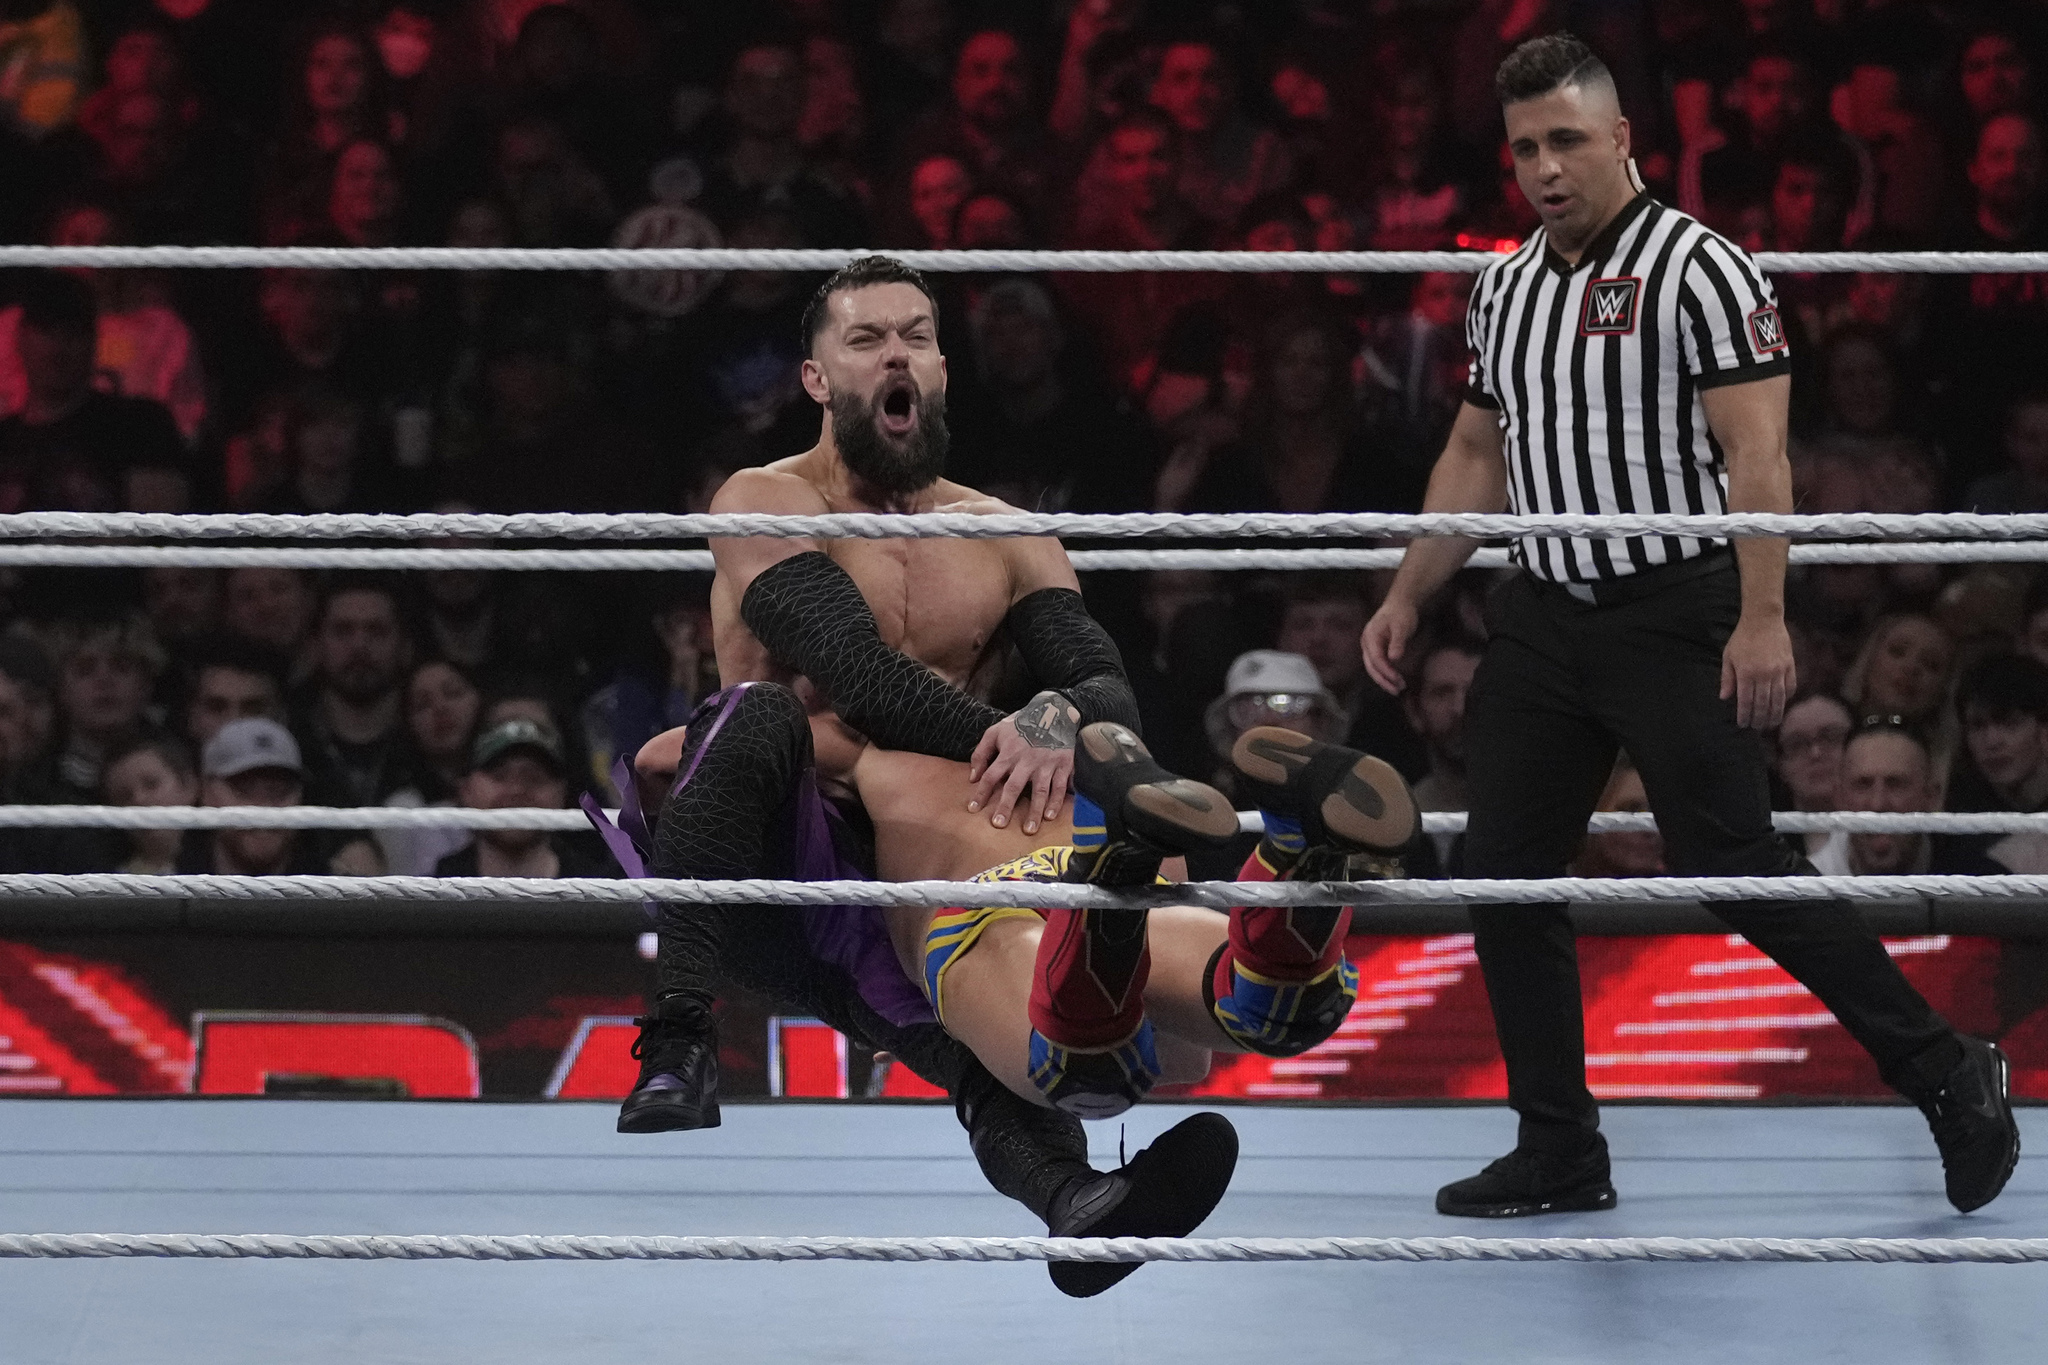 Wrester Finn Bálor, facing forward, is tackled by Johnny Gargano during WWE Monday Night RAW